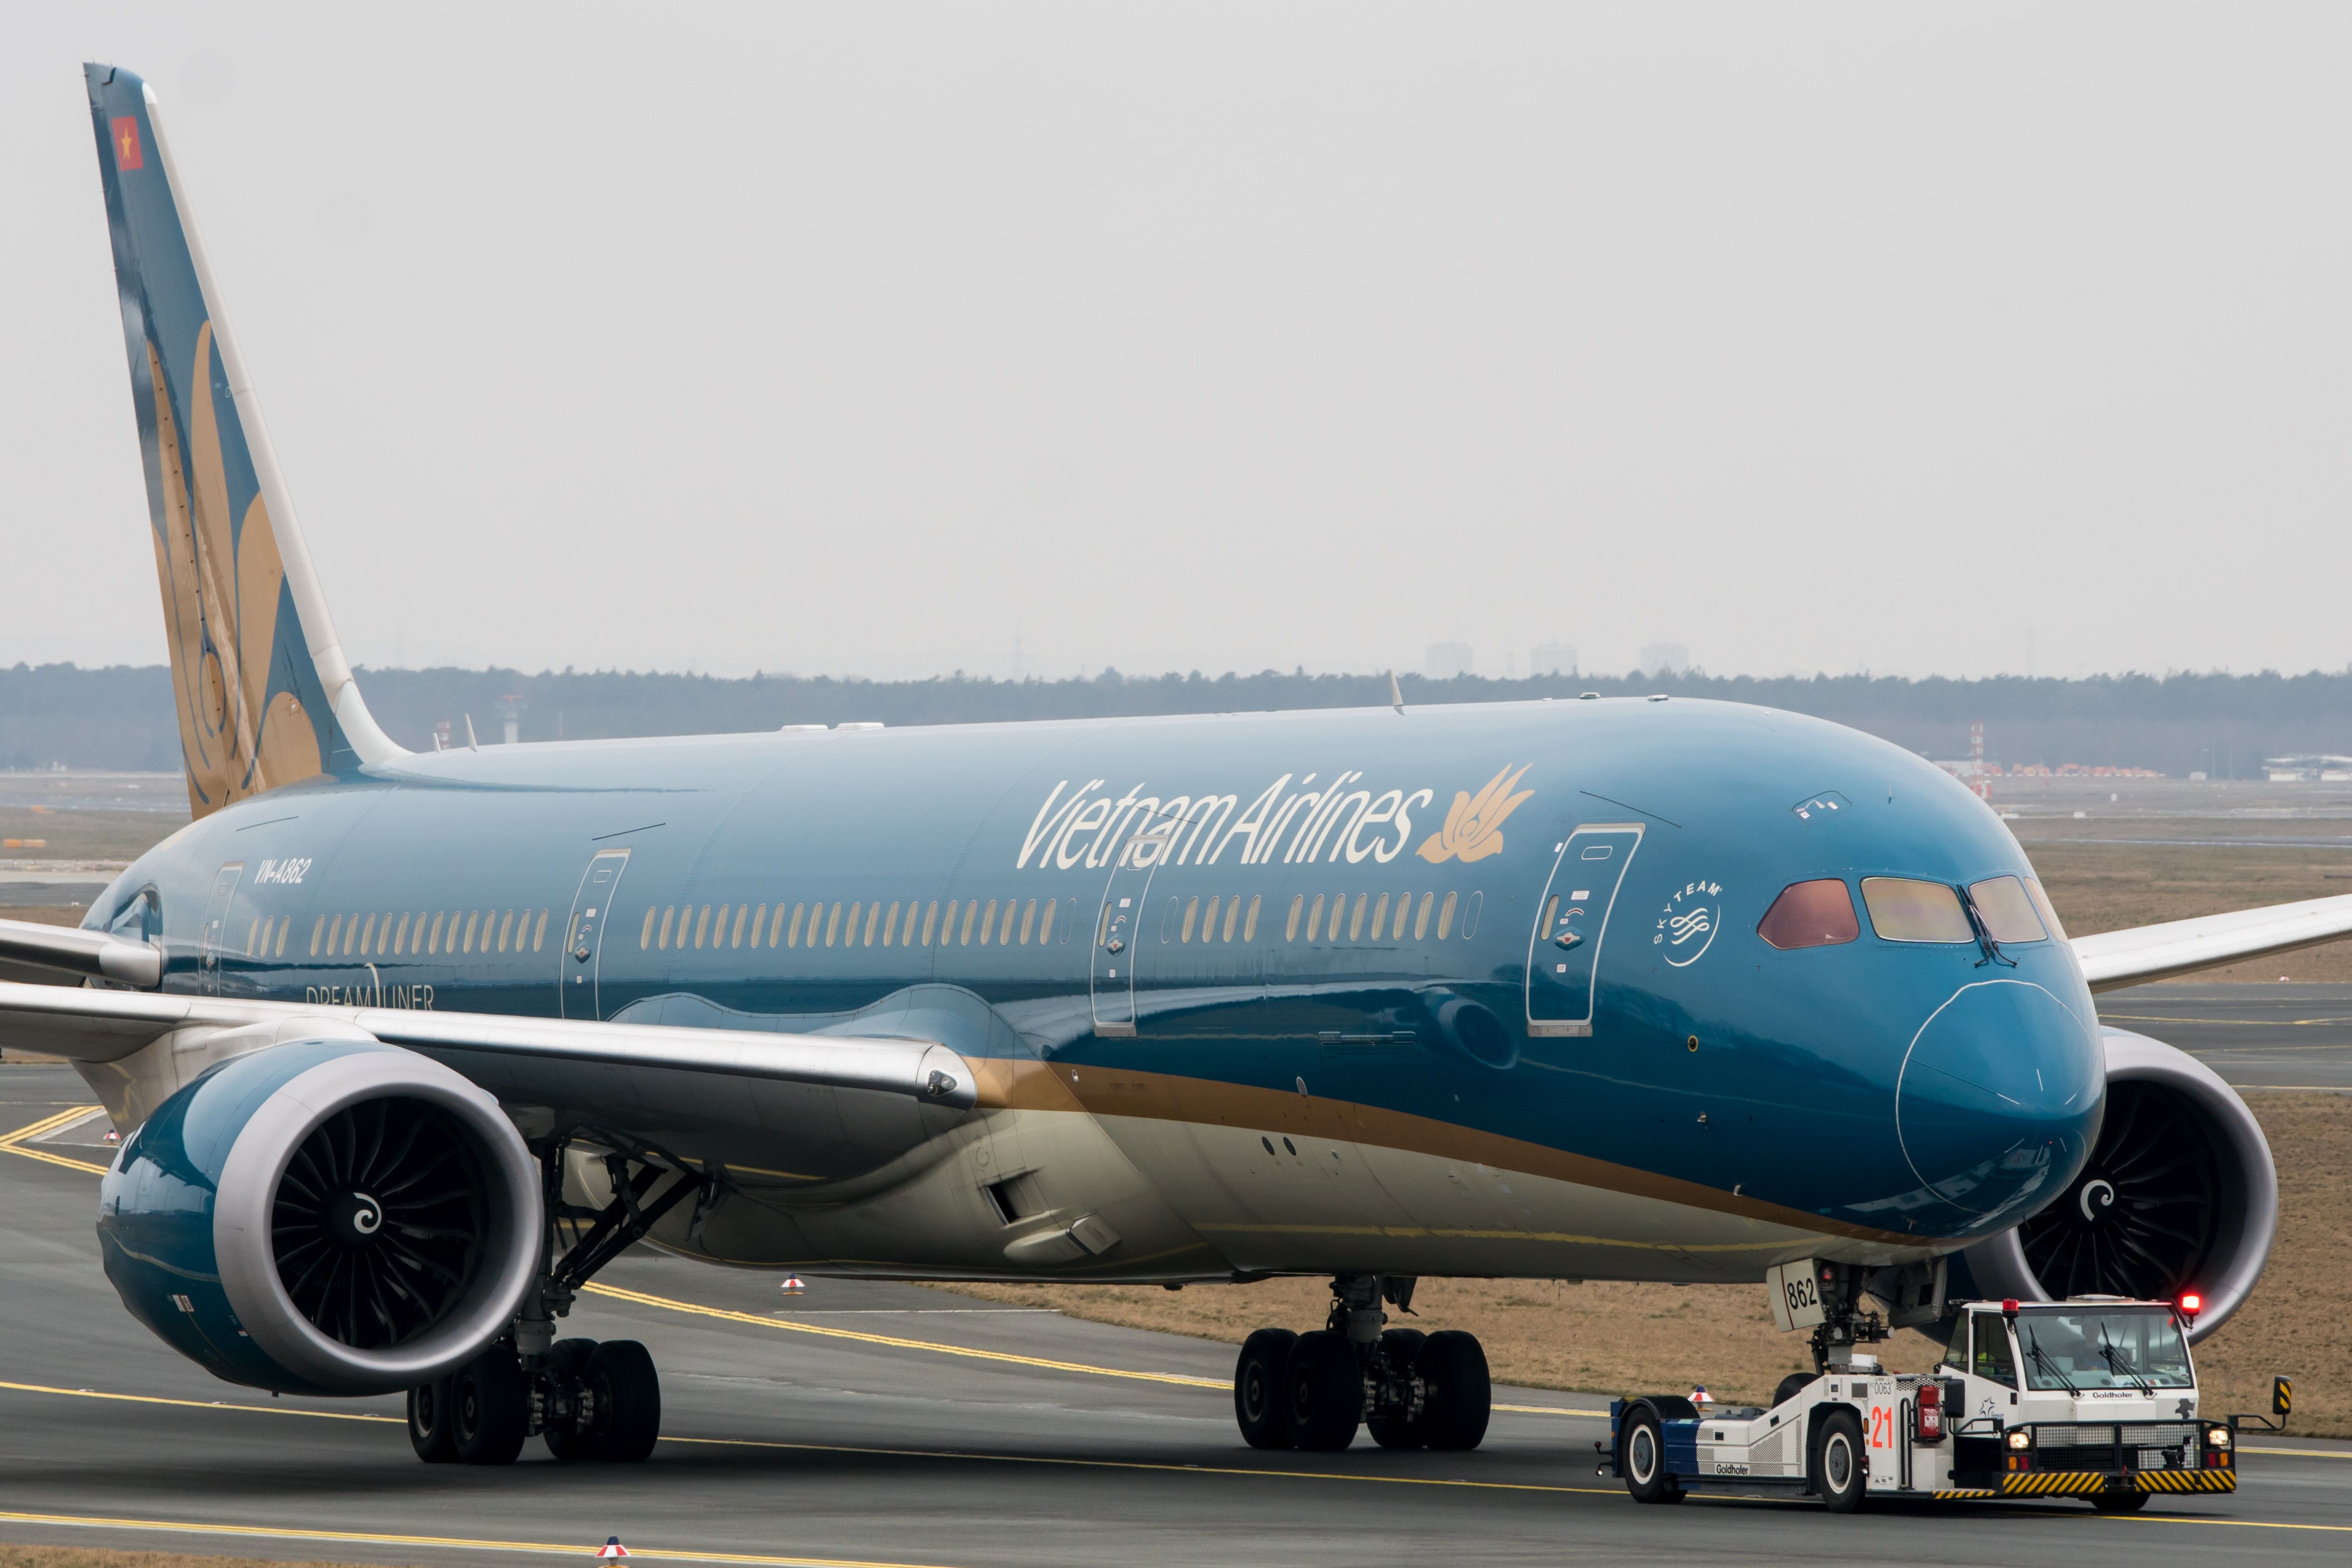 Vietnam Airlines aircraft from the front